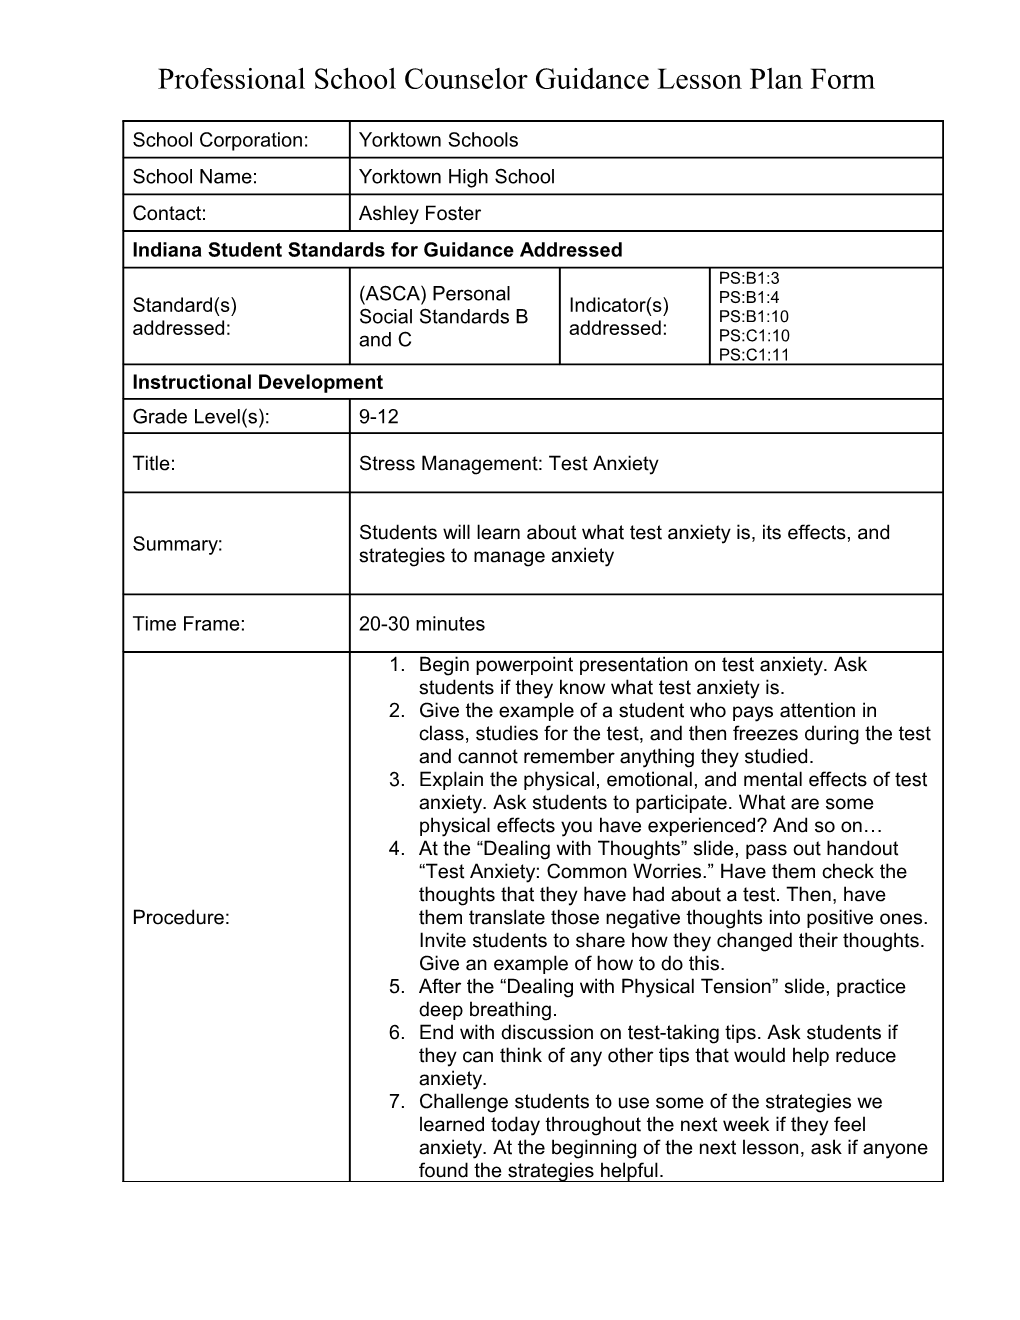 Professional School Counselor Guidance Lesson Plan Form